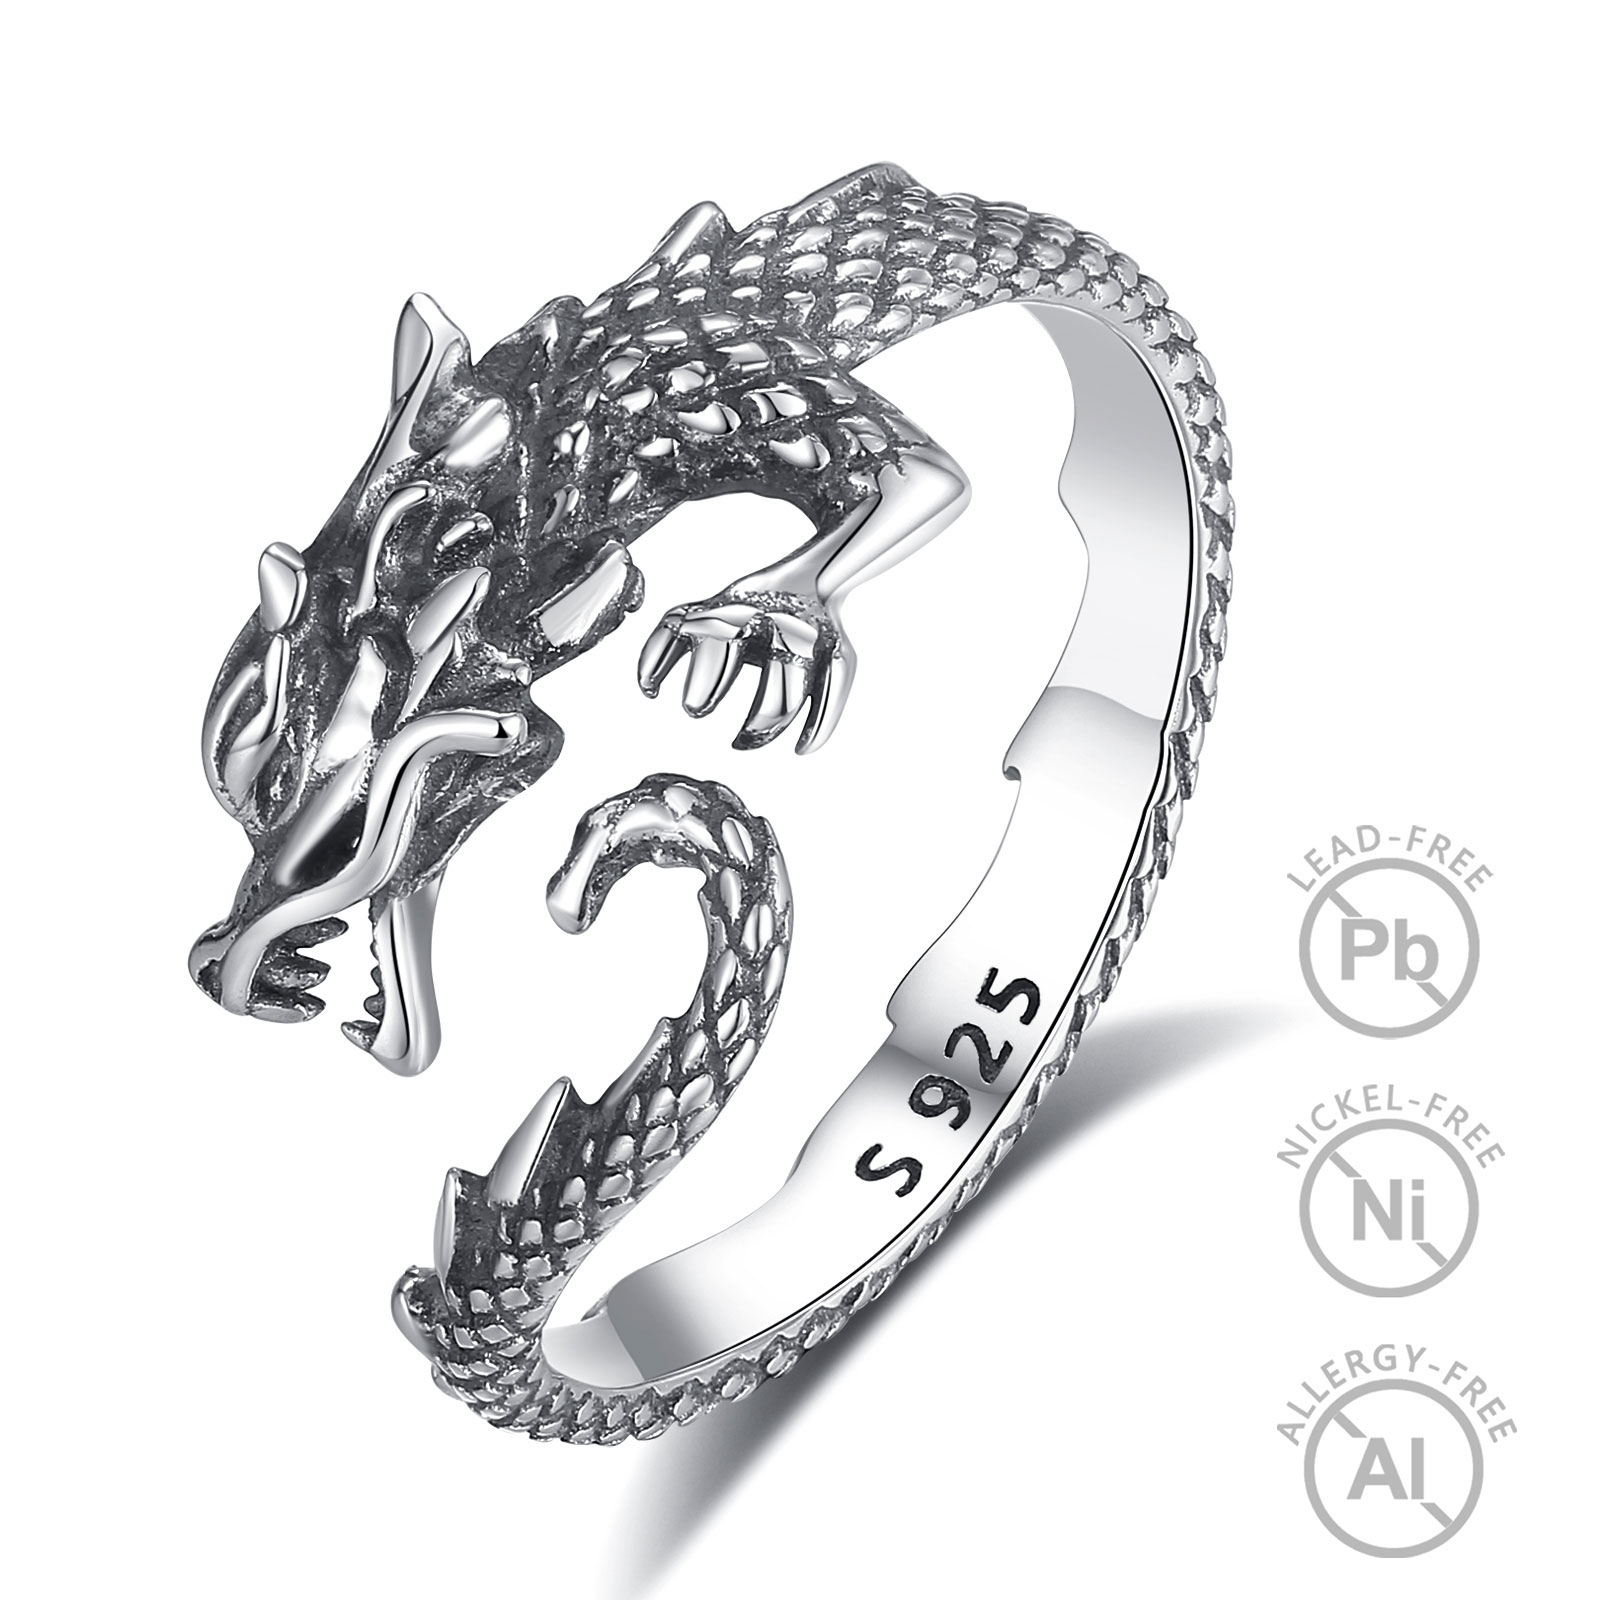 Merryshine Jewelry 925 Sterling Silver Rings Open Adjustable Size Vintage Design Dragon Ring for Men